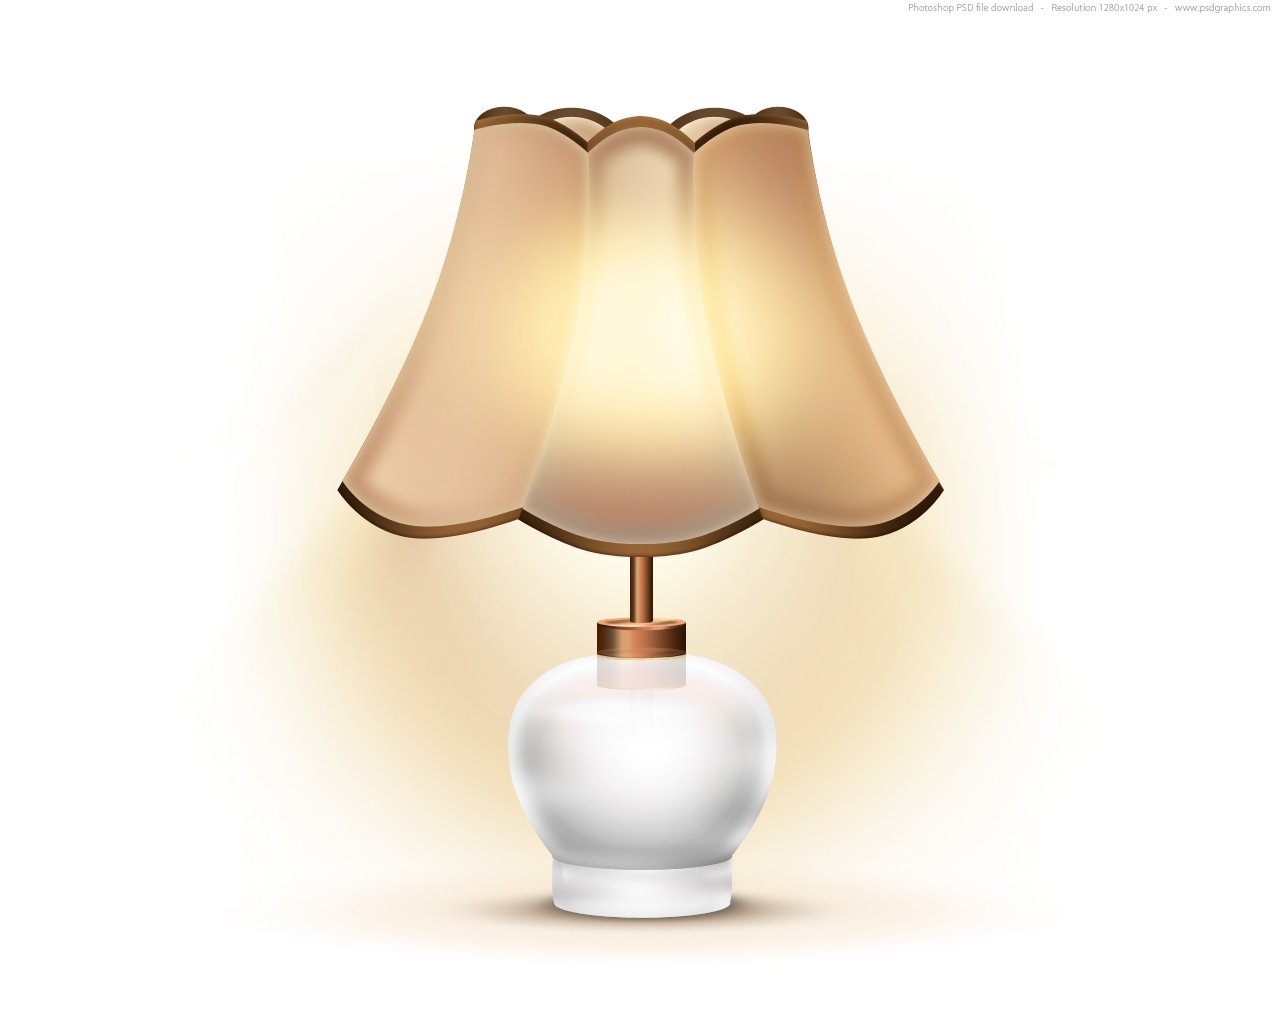 old-lamp-icon.jpg